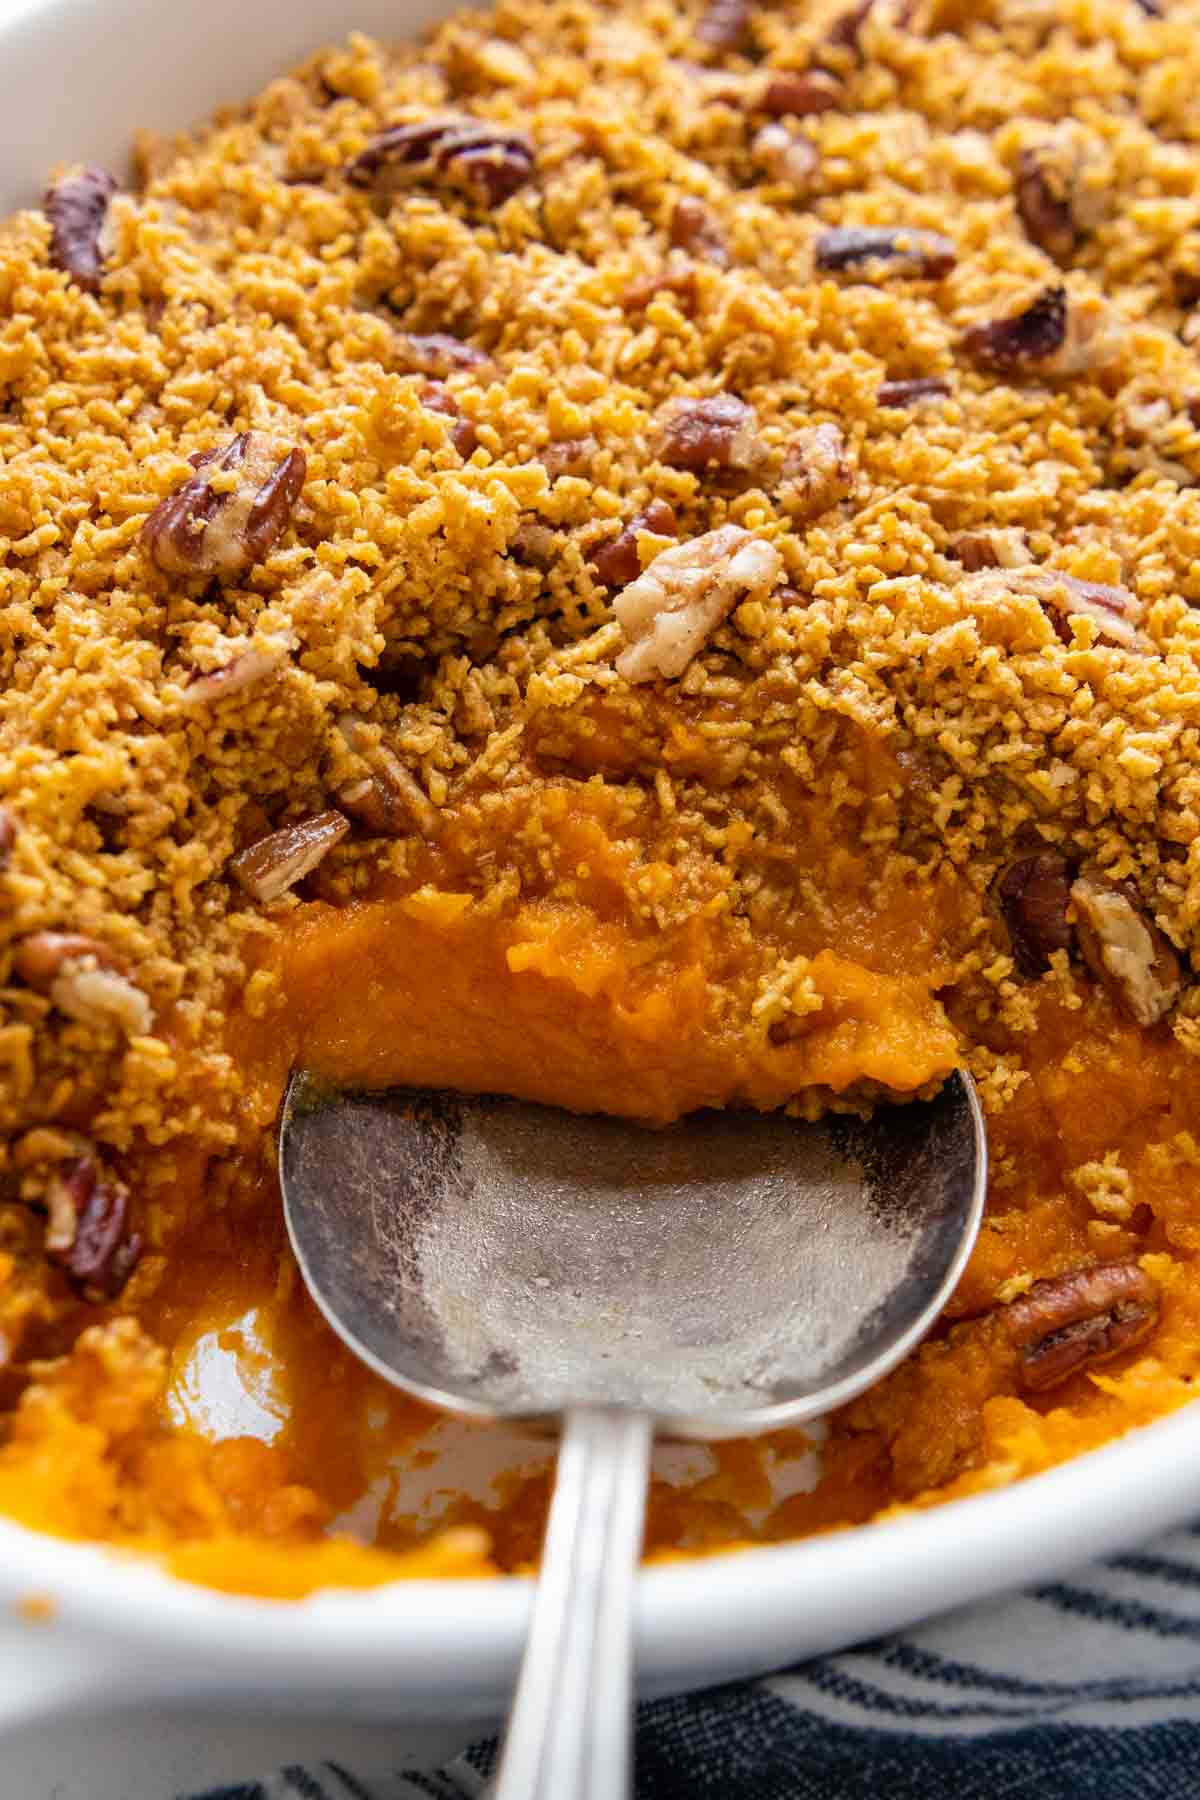 a spoon going into the sweet potatoes.